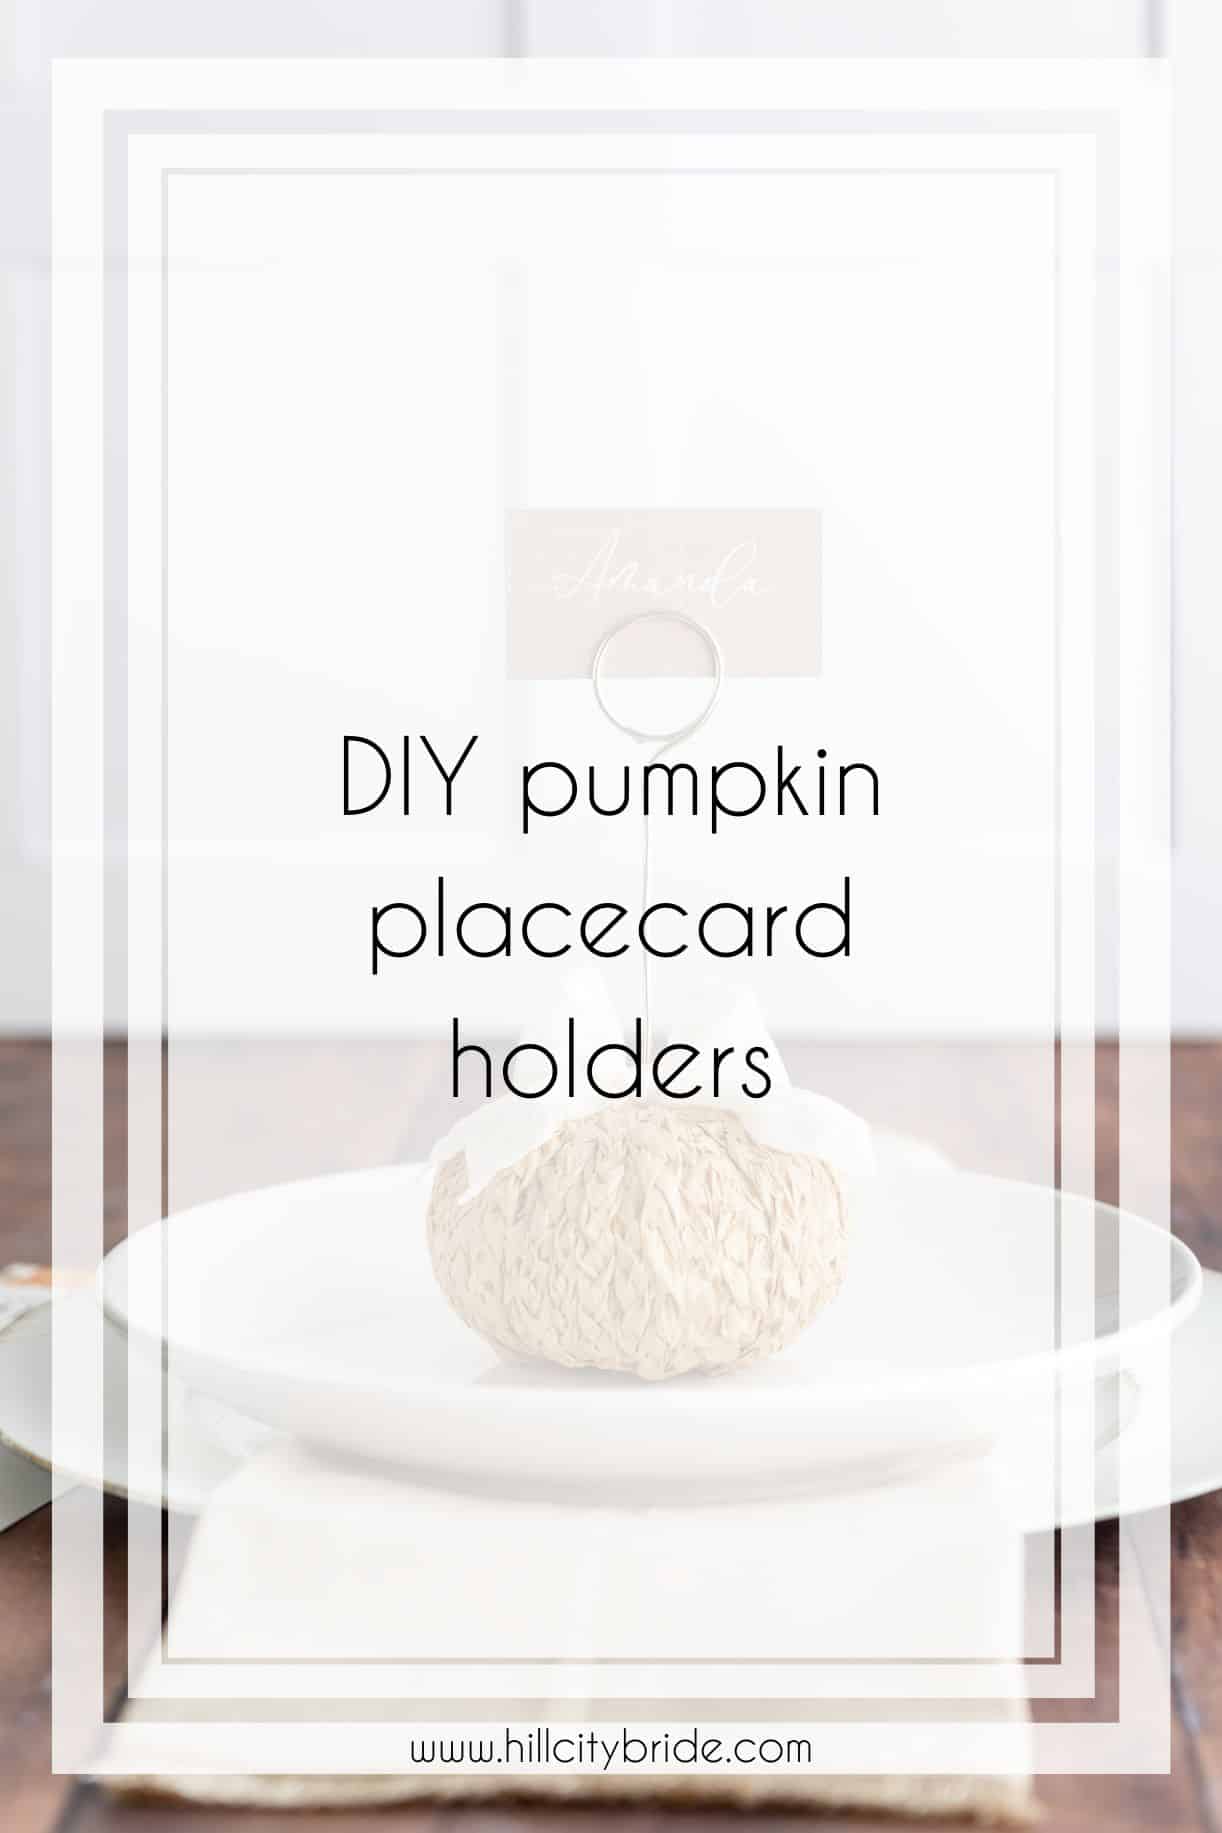 Make These Cute DIY Pumpkin Placecard Holders for Your Big Day